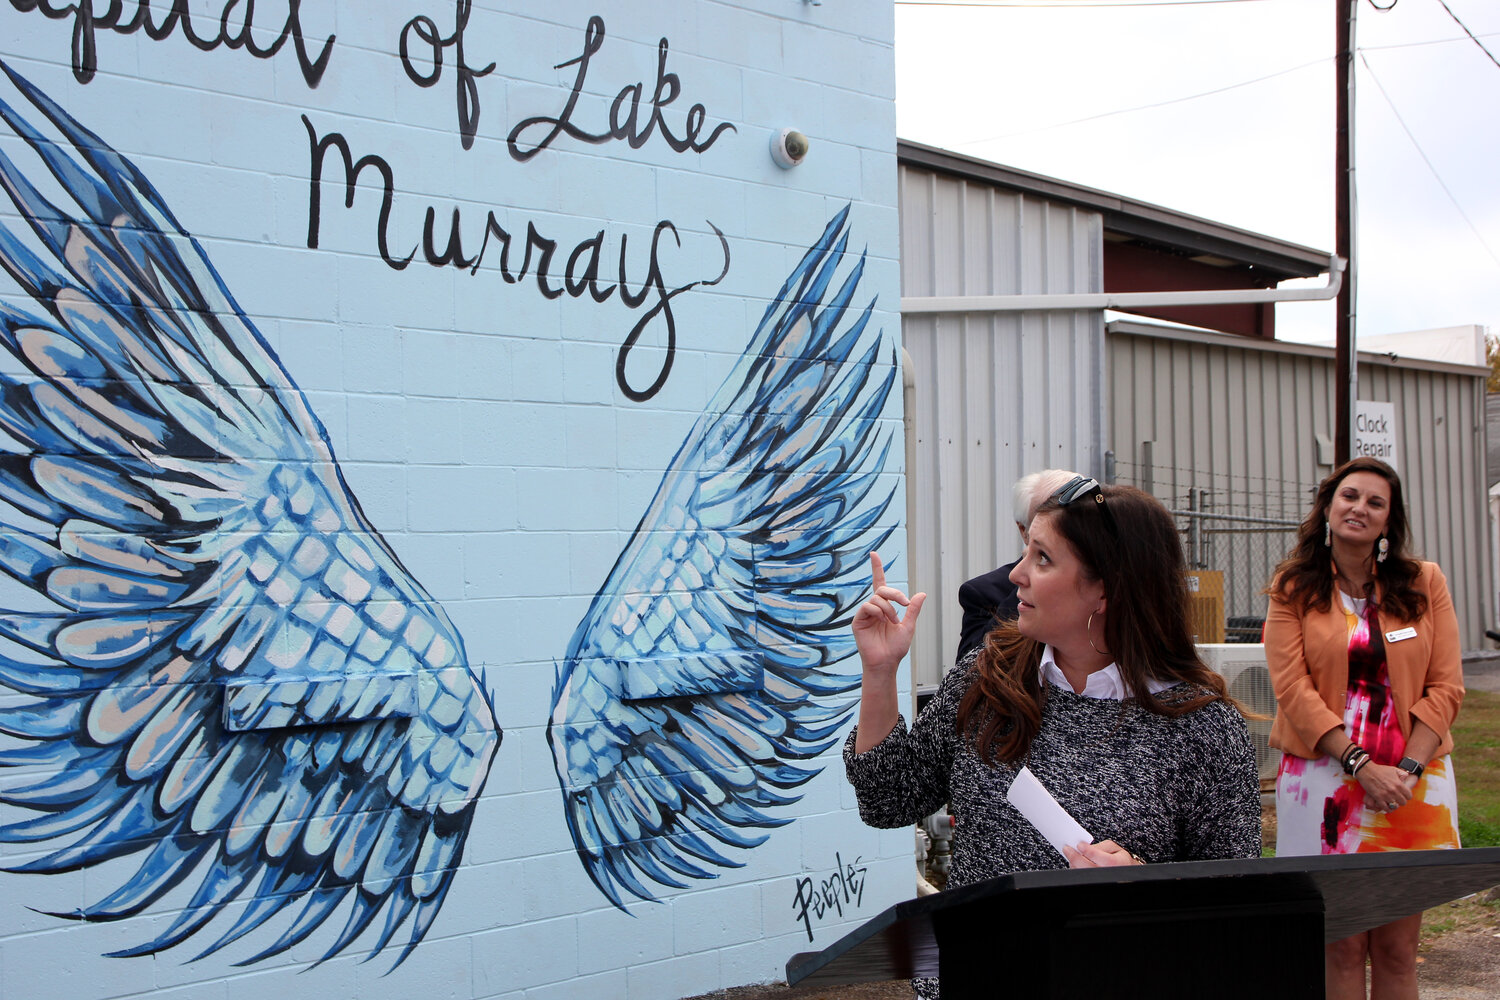 Chapin artist Nicki Peeples talks about her new mural, "Small Town Charm."